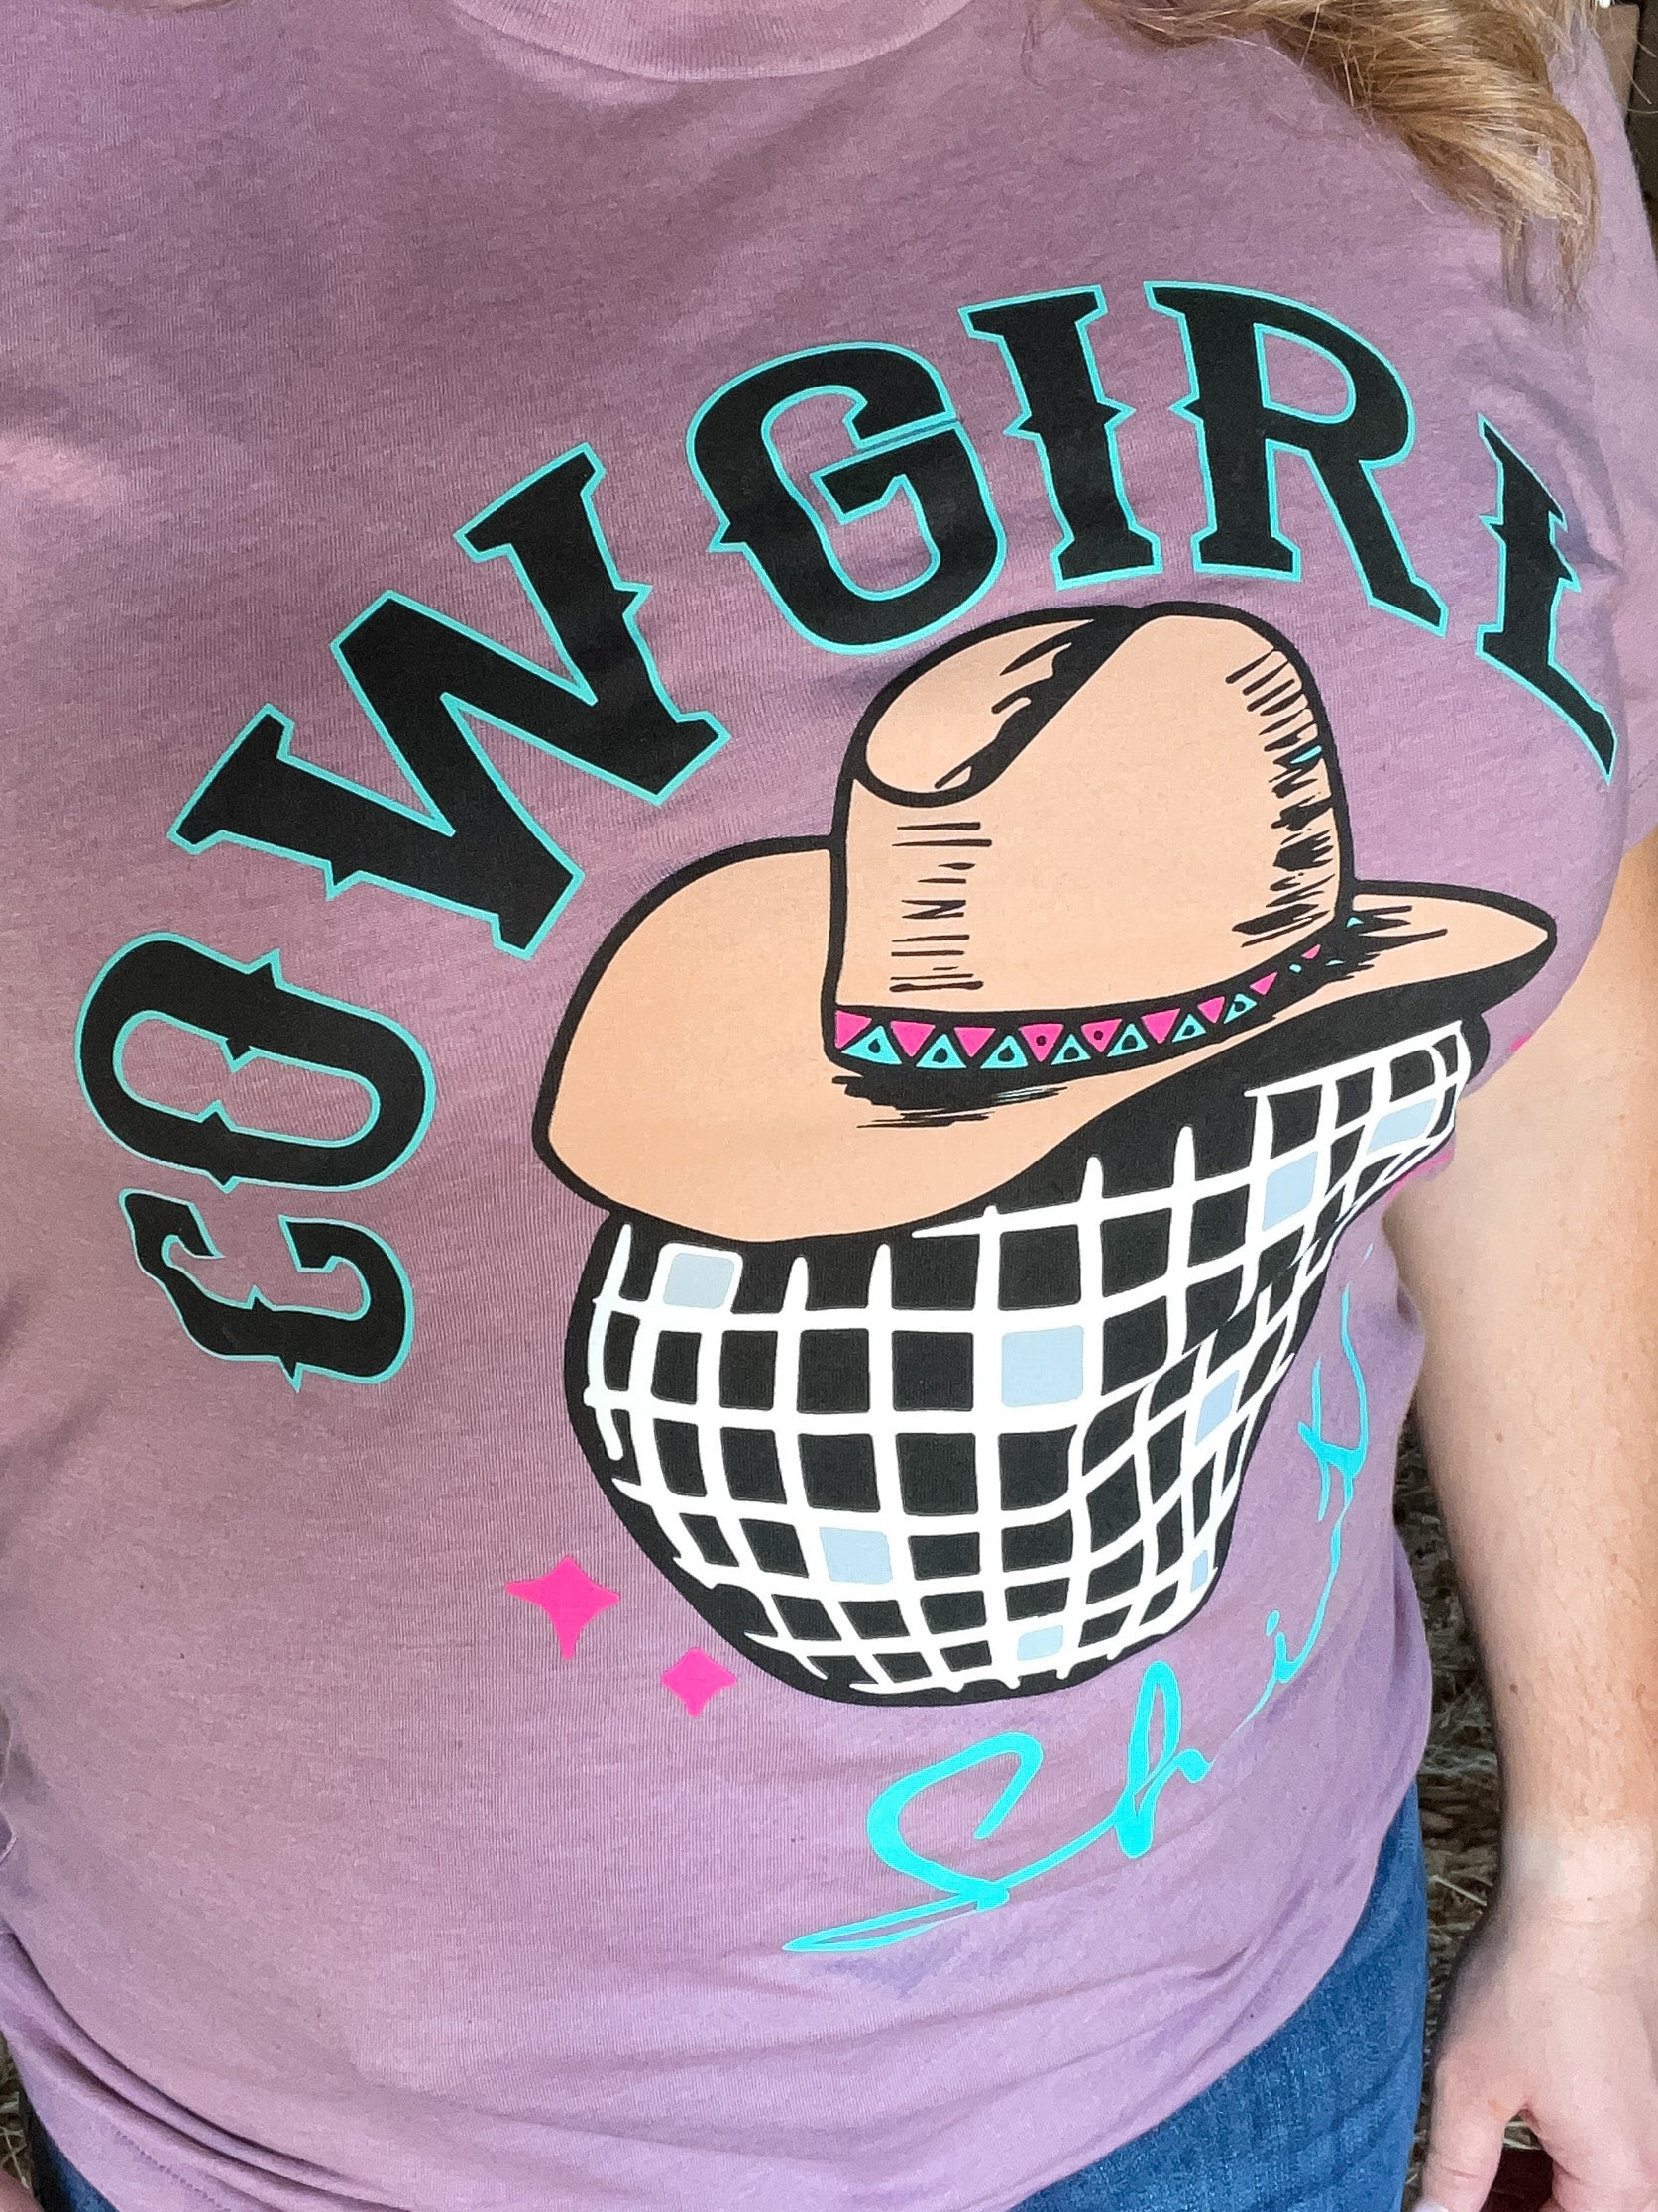 The Cowgirl Shit Tee